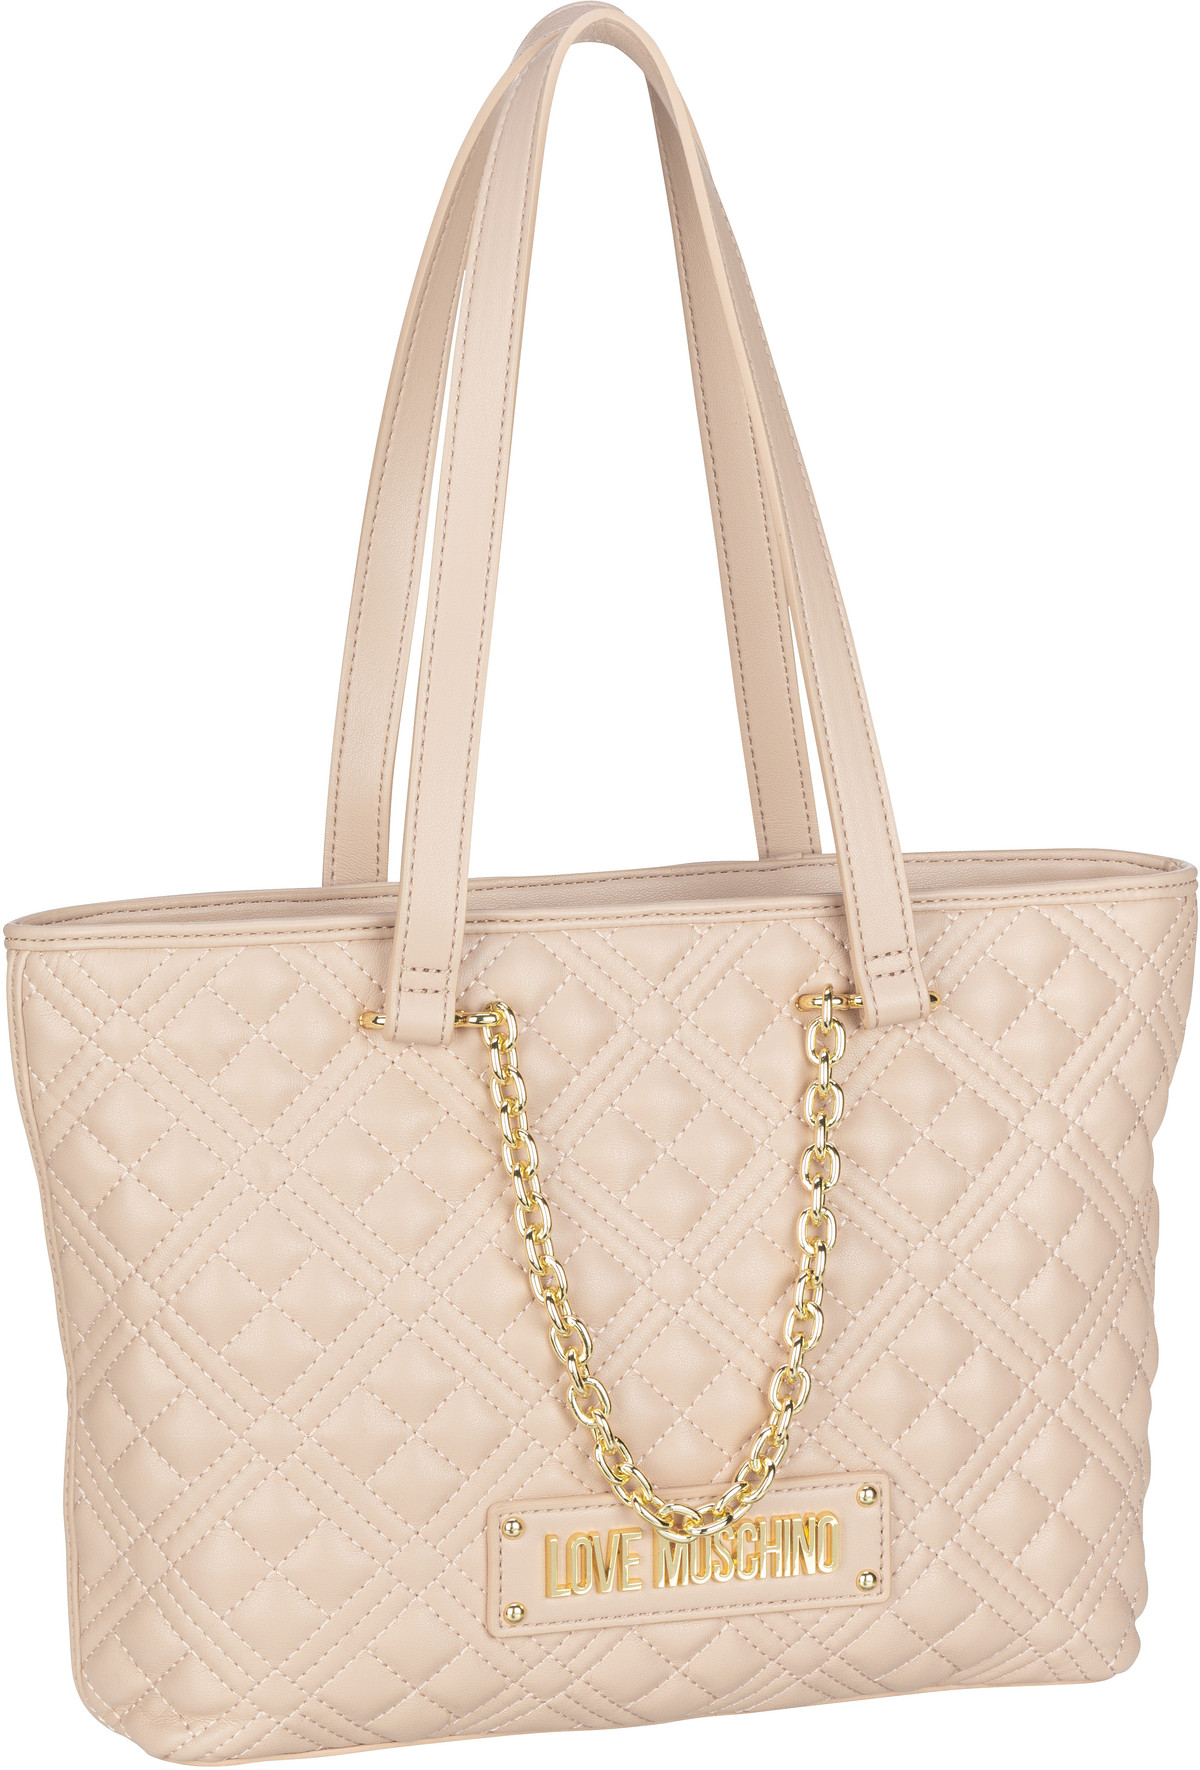 Love Moschino Quilted Bag 4004 - Nude